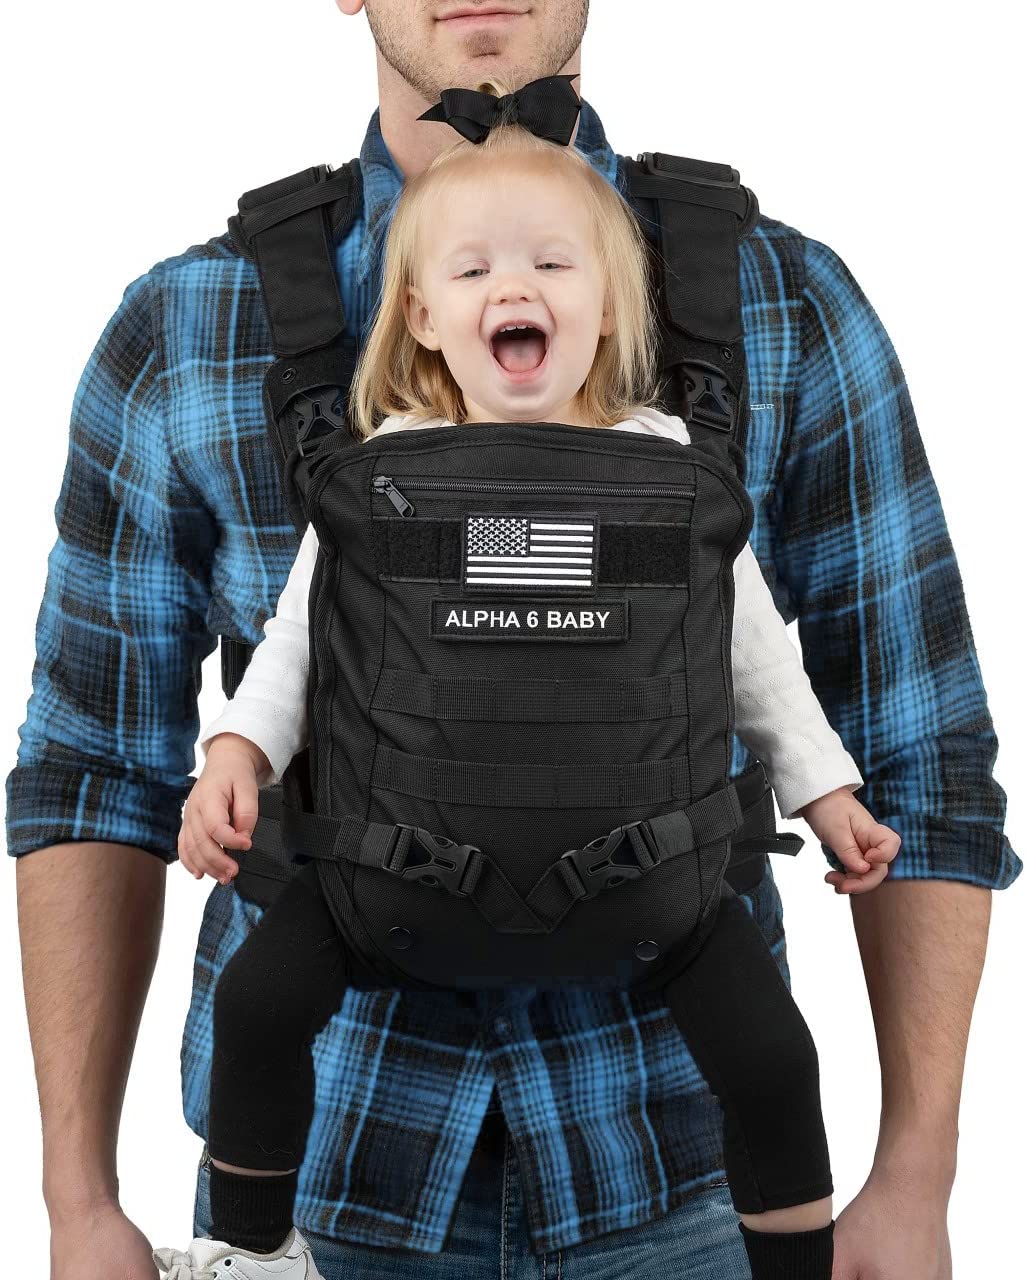 Alpha Six Baby Carrier – All Day Comfort for Infant and Toddlers